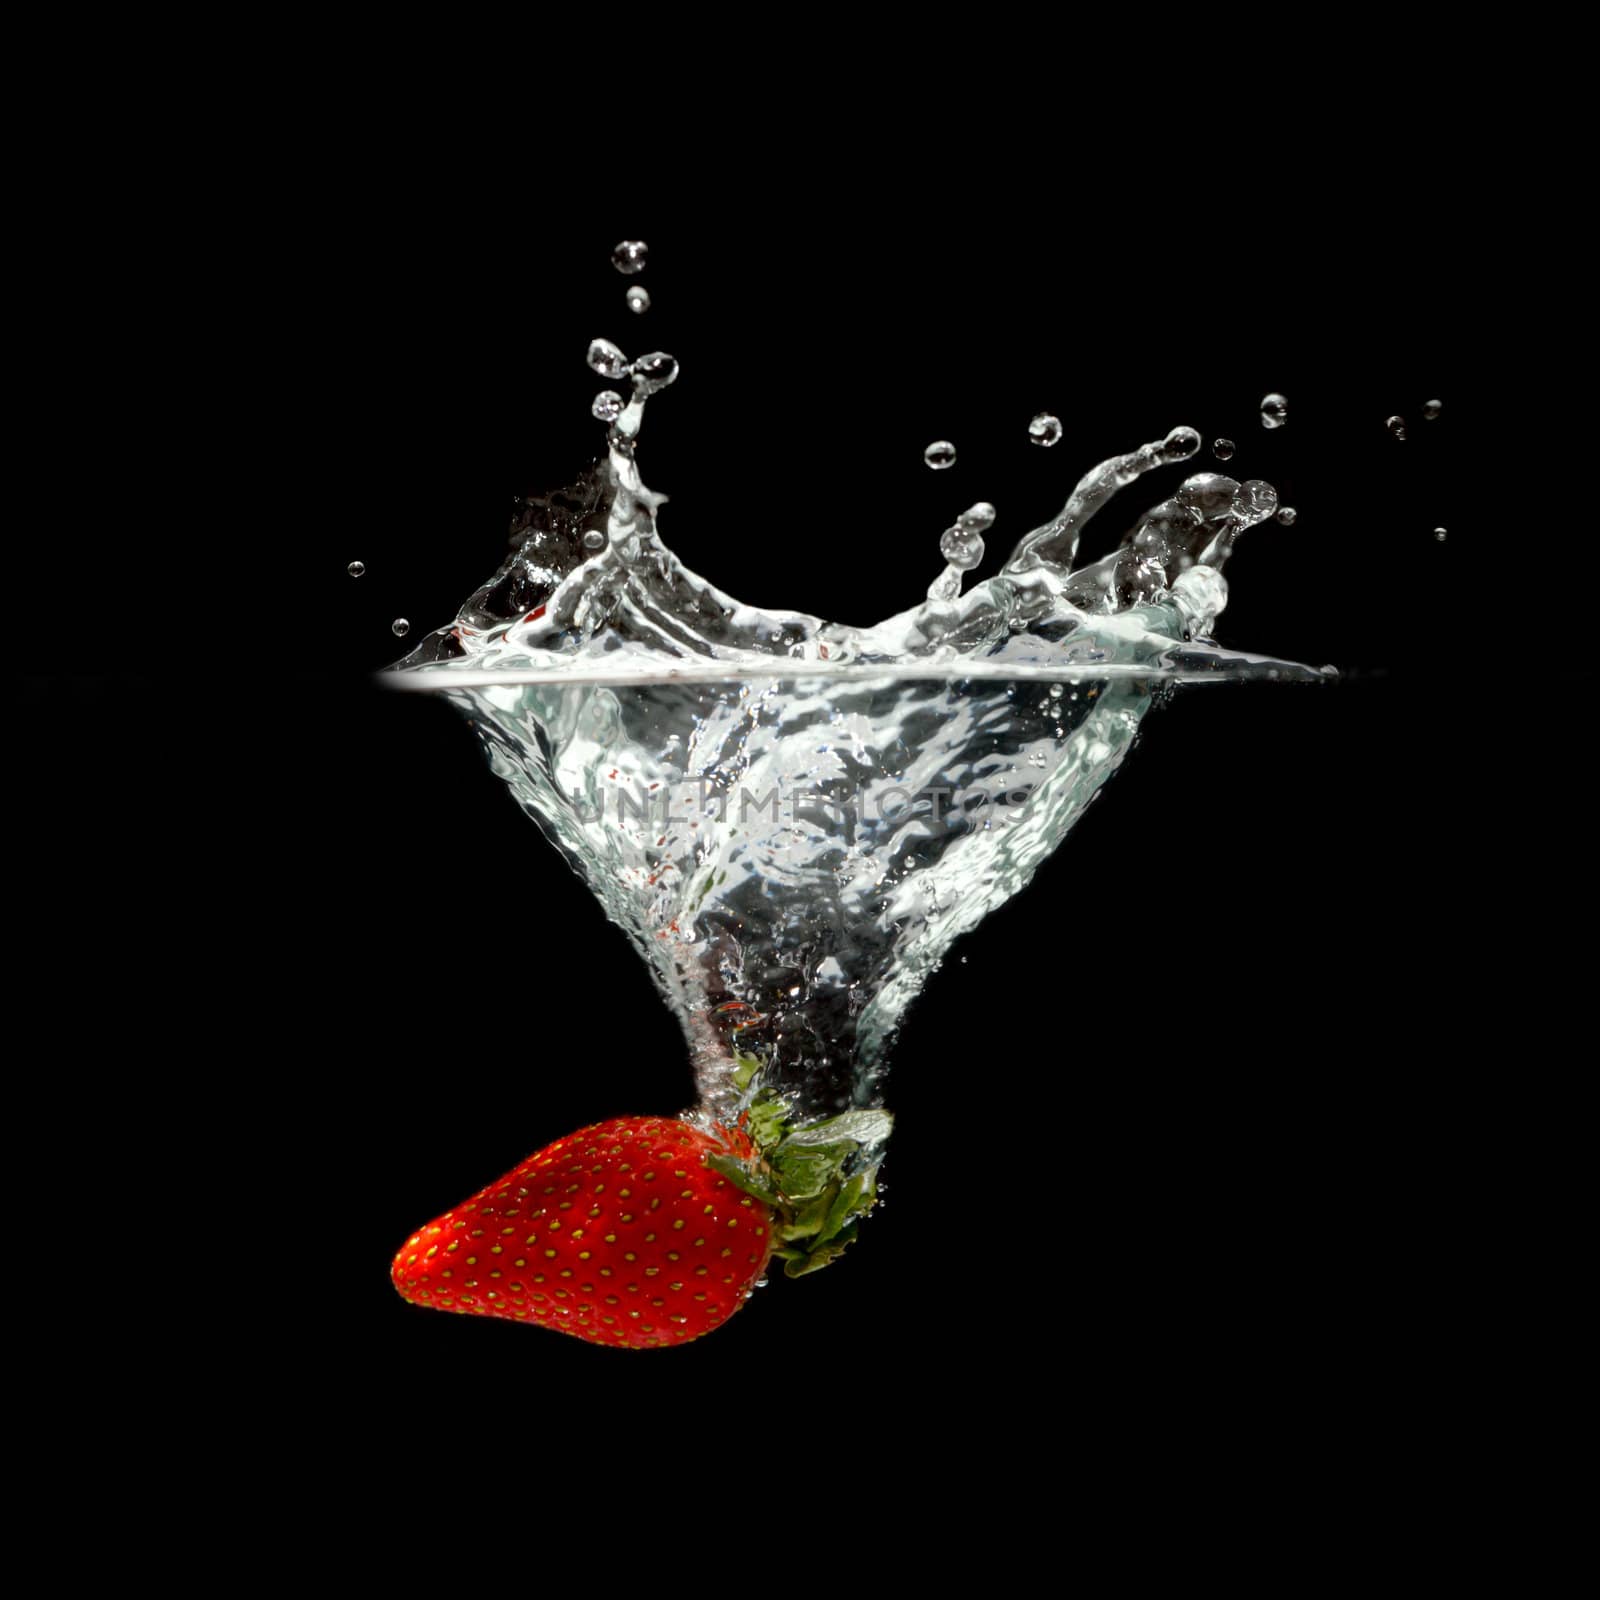 strawberry splashing in water by Discovod